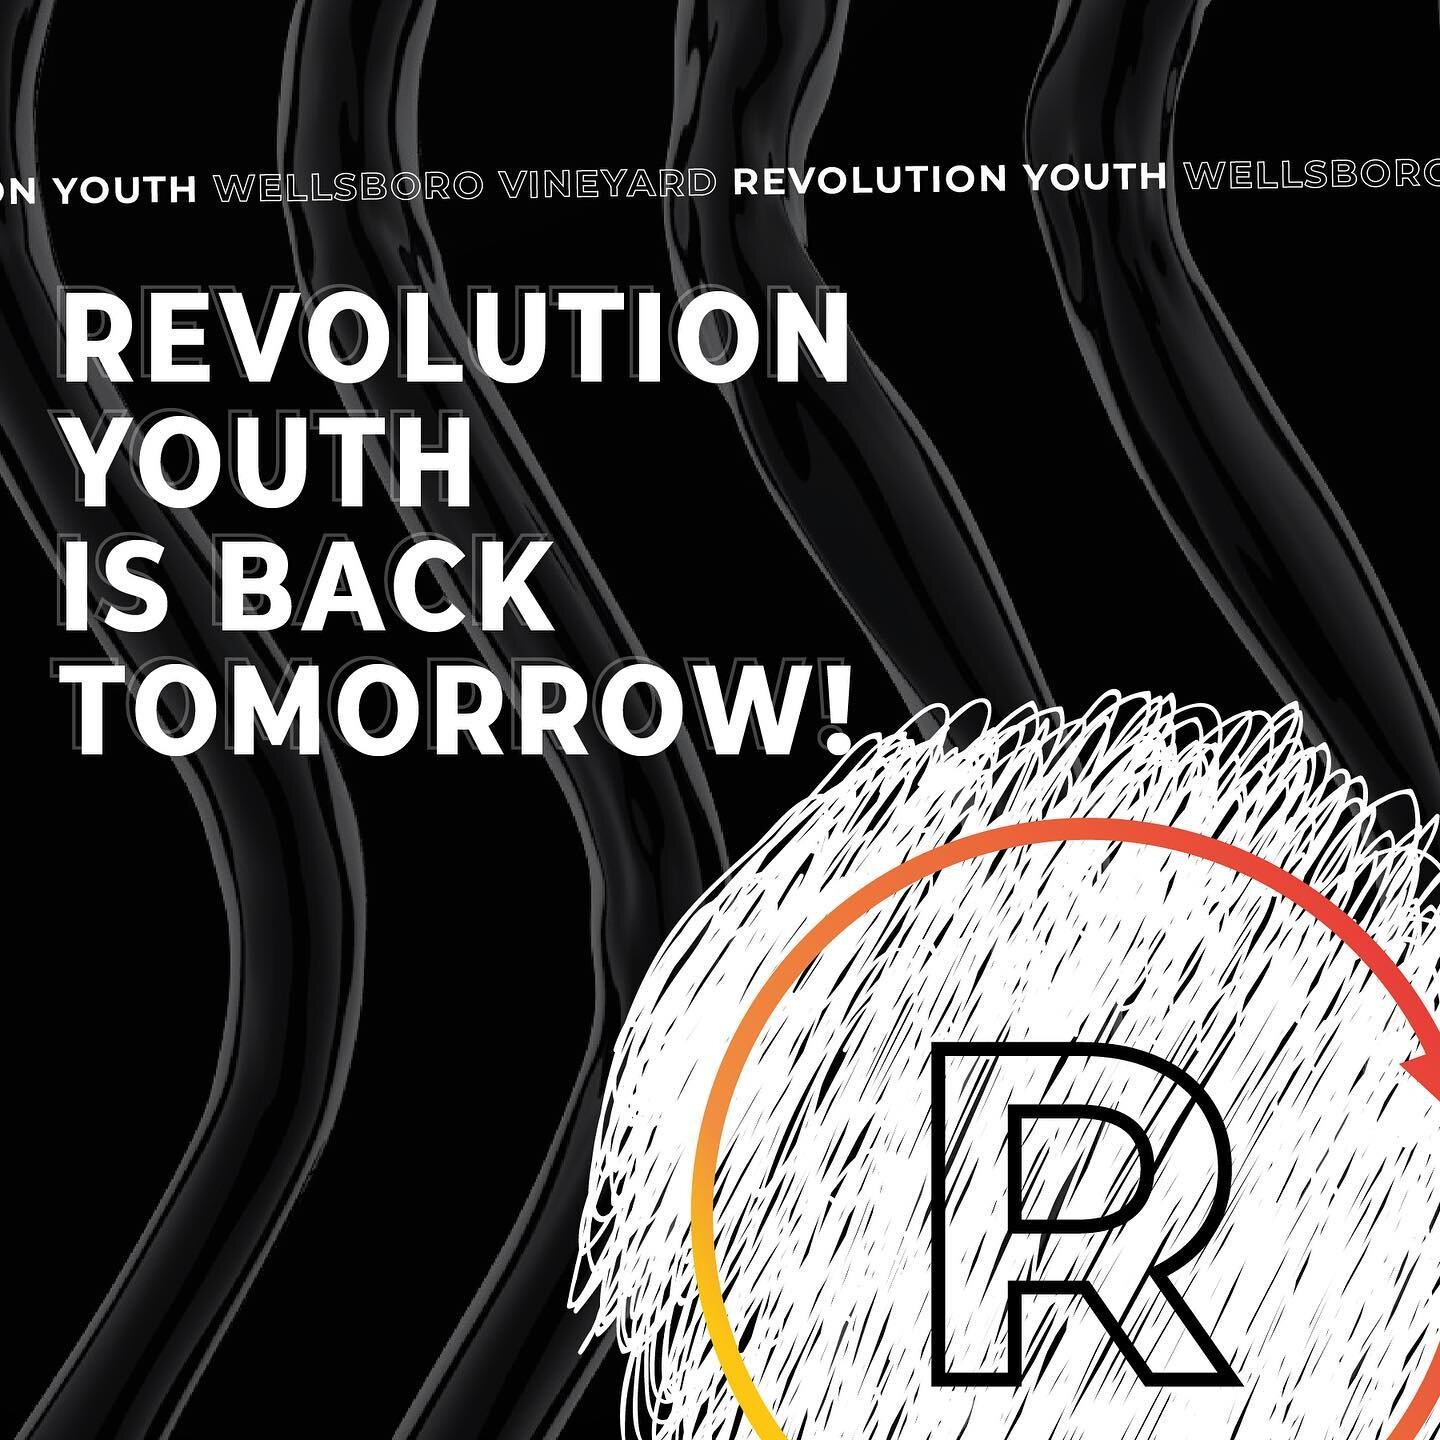 TOMORROW! 🙌🏻 Head to our stories for all the things you need to know about our NEW Wednesday night #revolutionyouthwellsboro services!